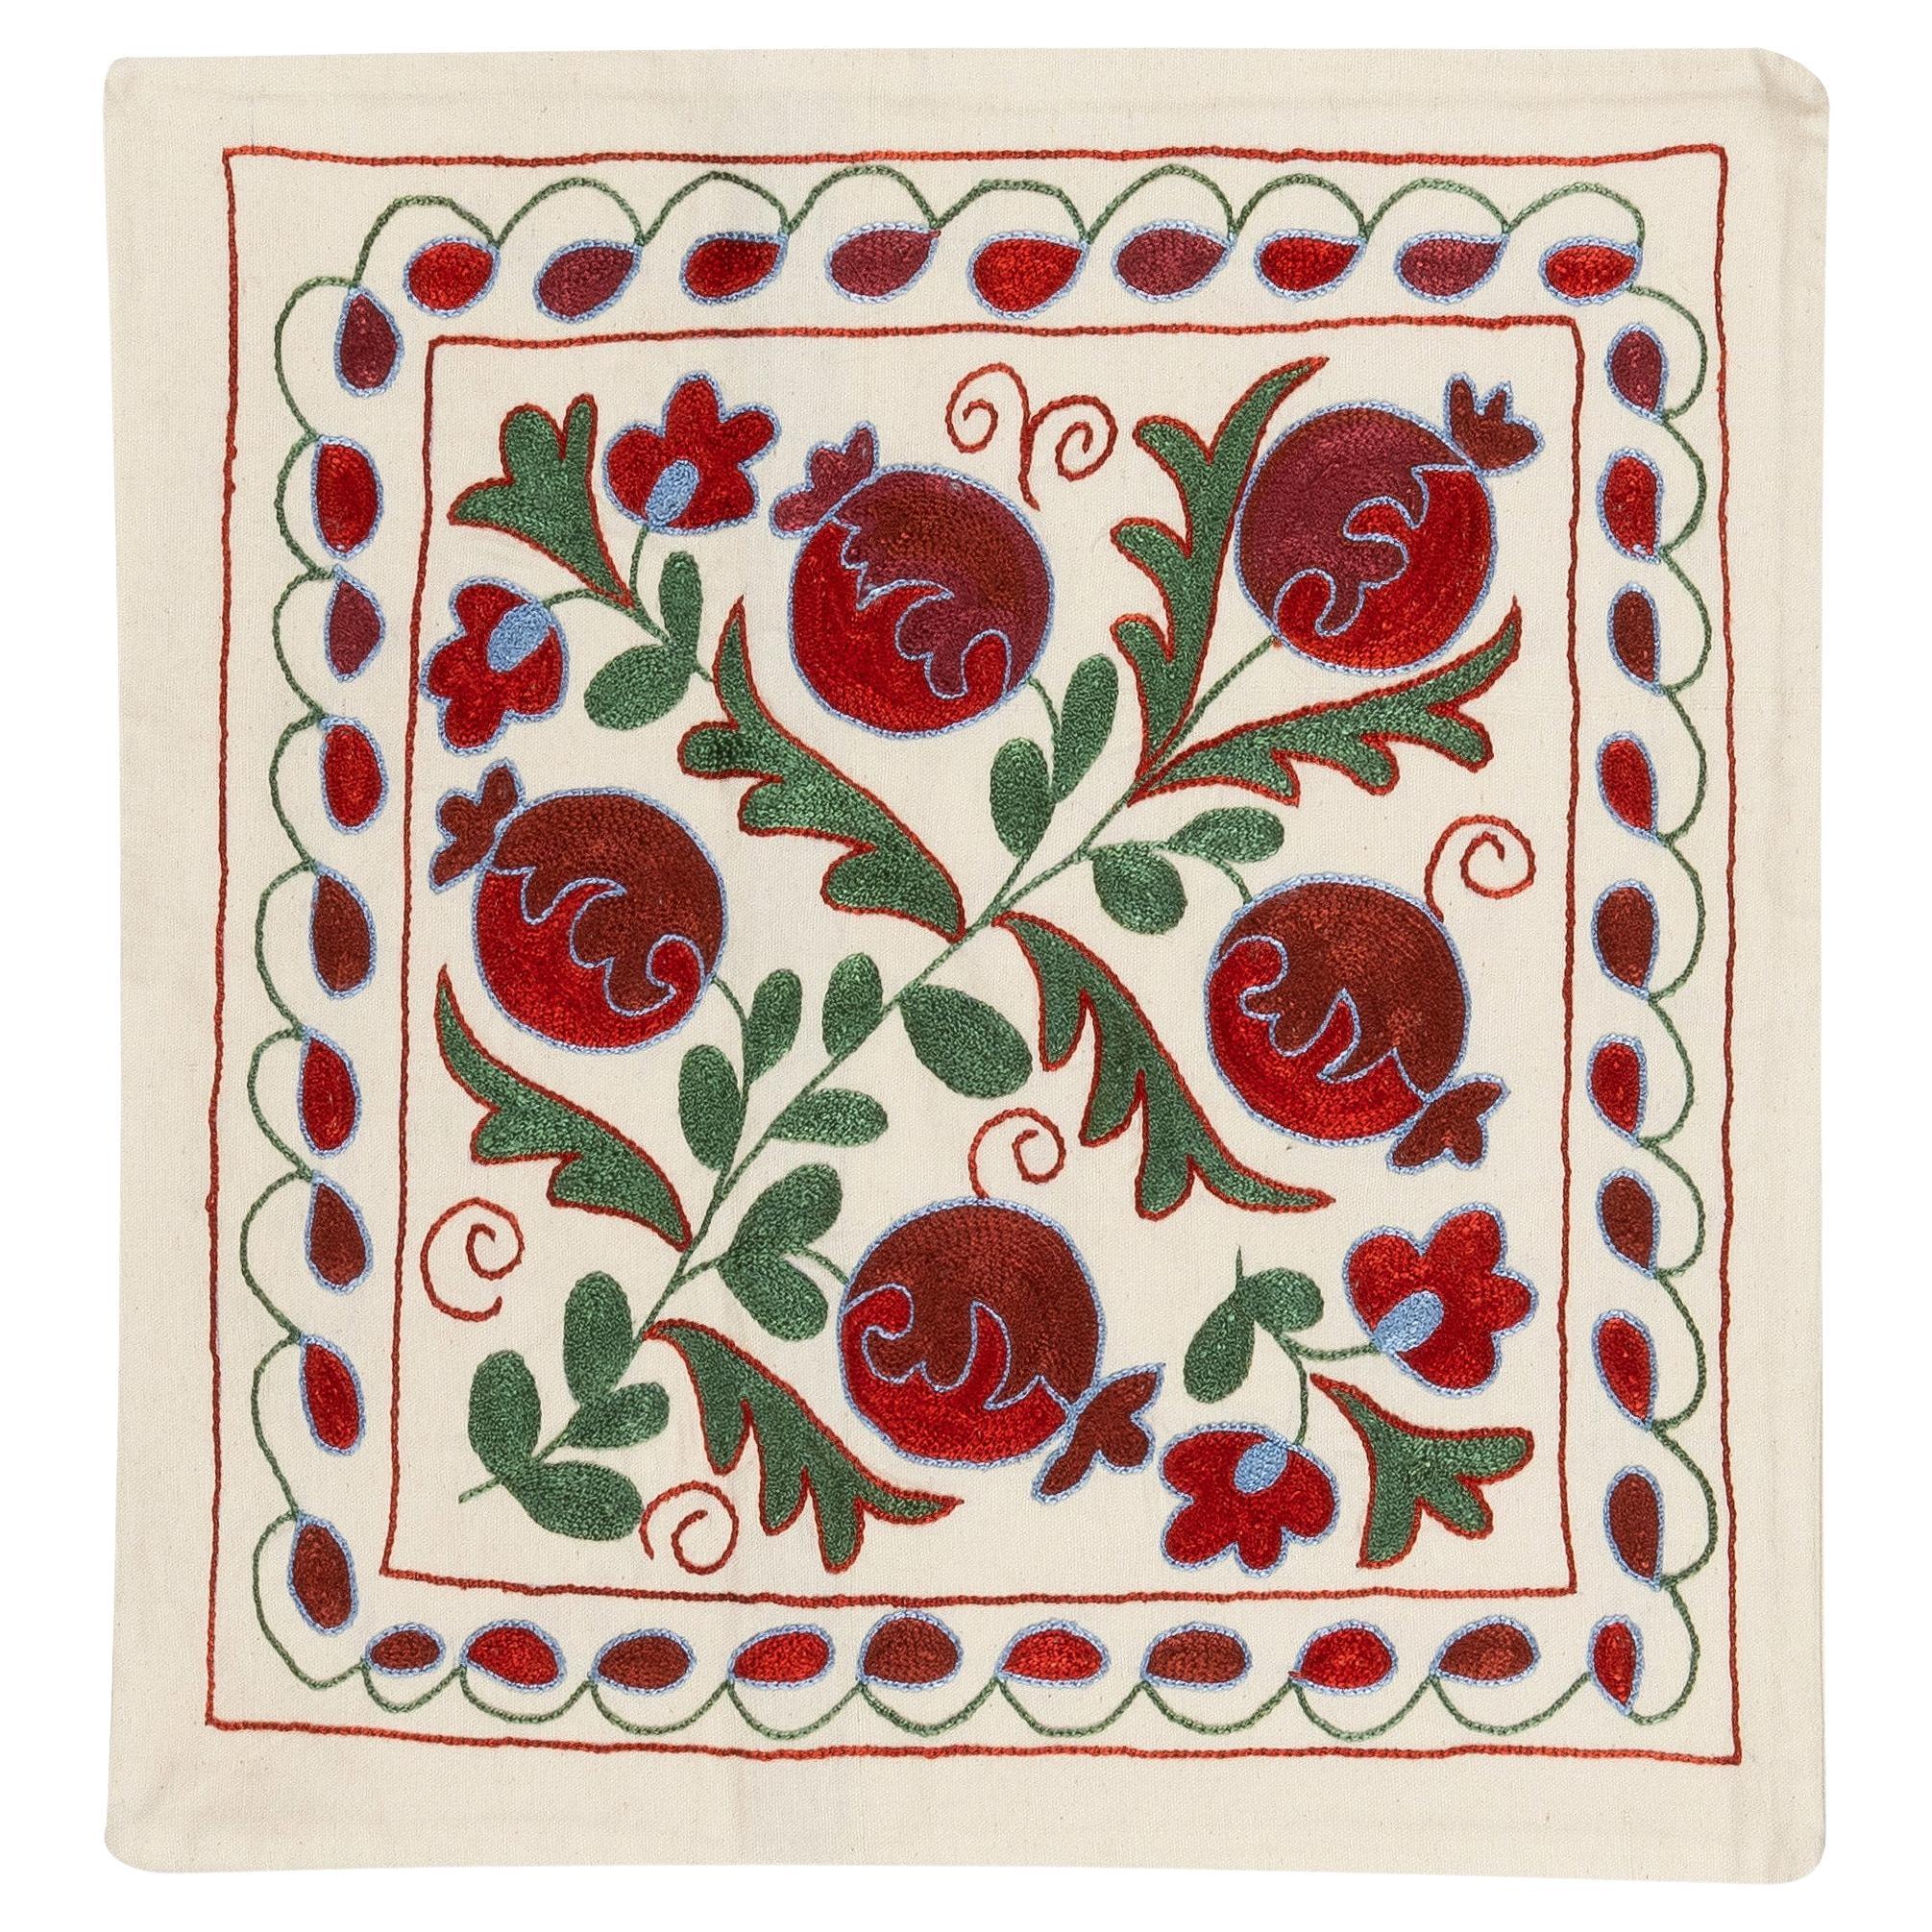 19"x19" Decorative Silk Embroidered Suzani Cushion Cover in Cream, Red and Green For Sale